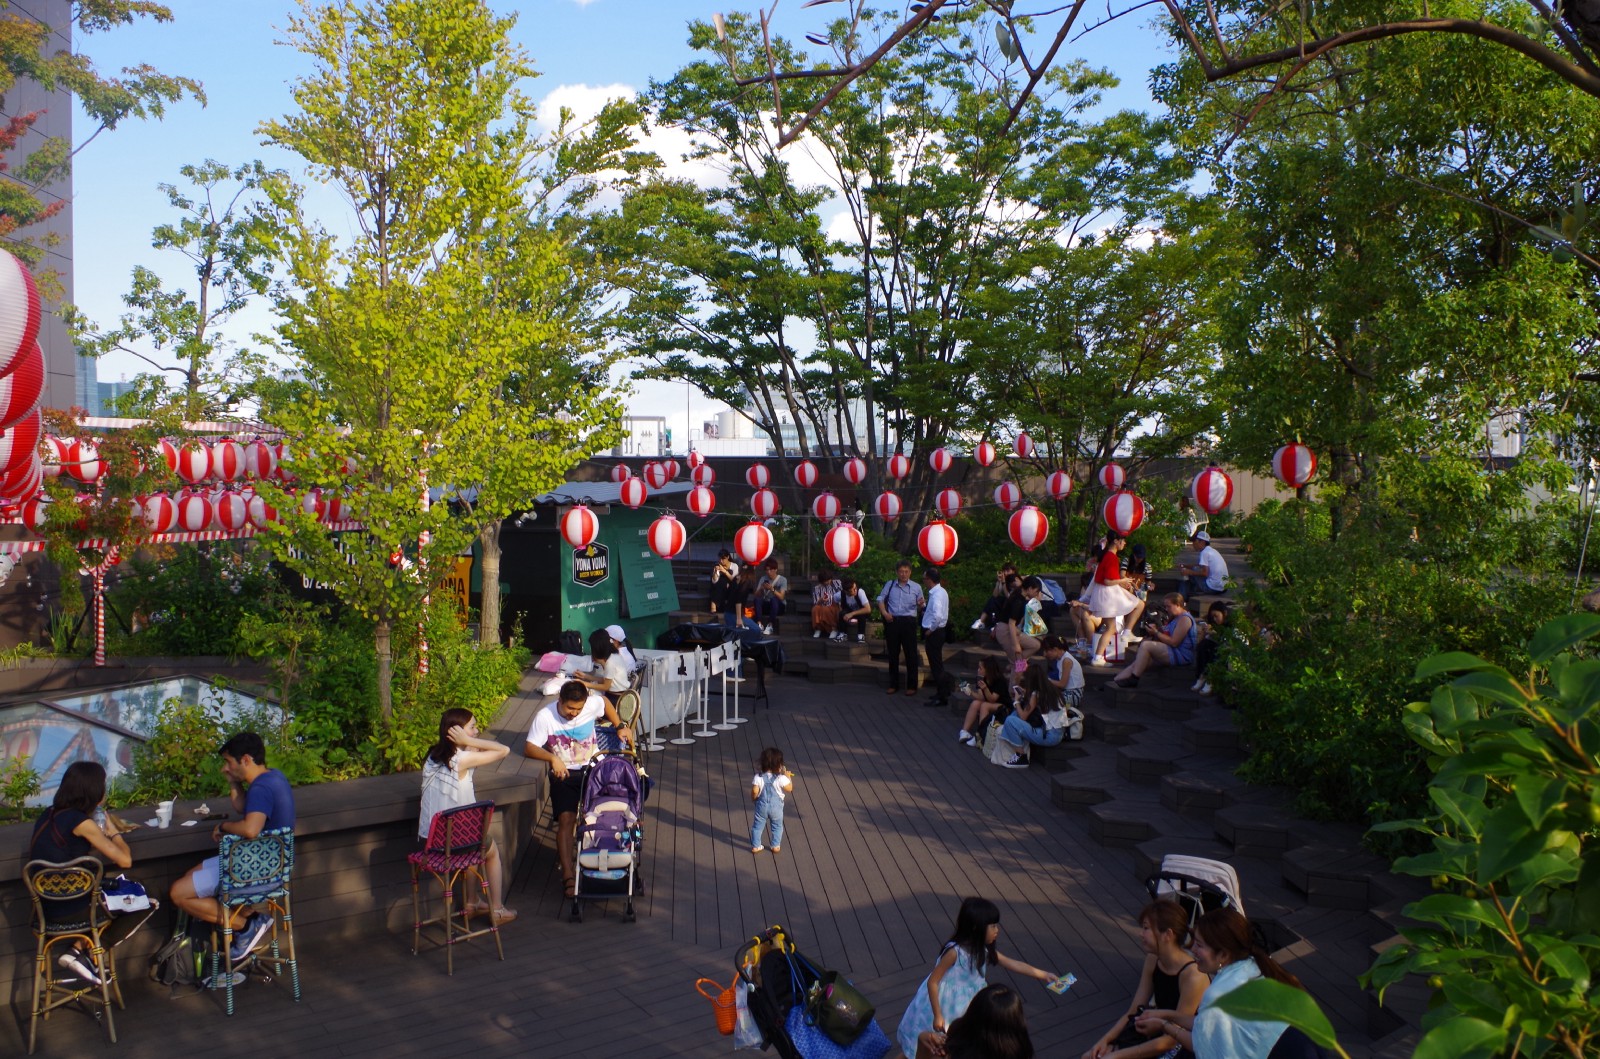 kawaii places to visit in tokyo